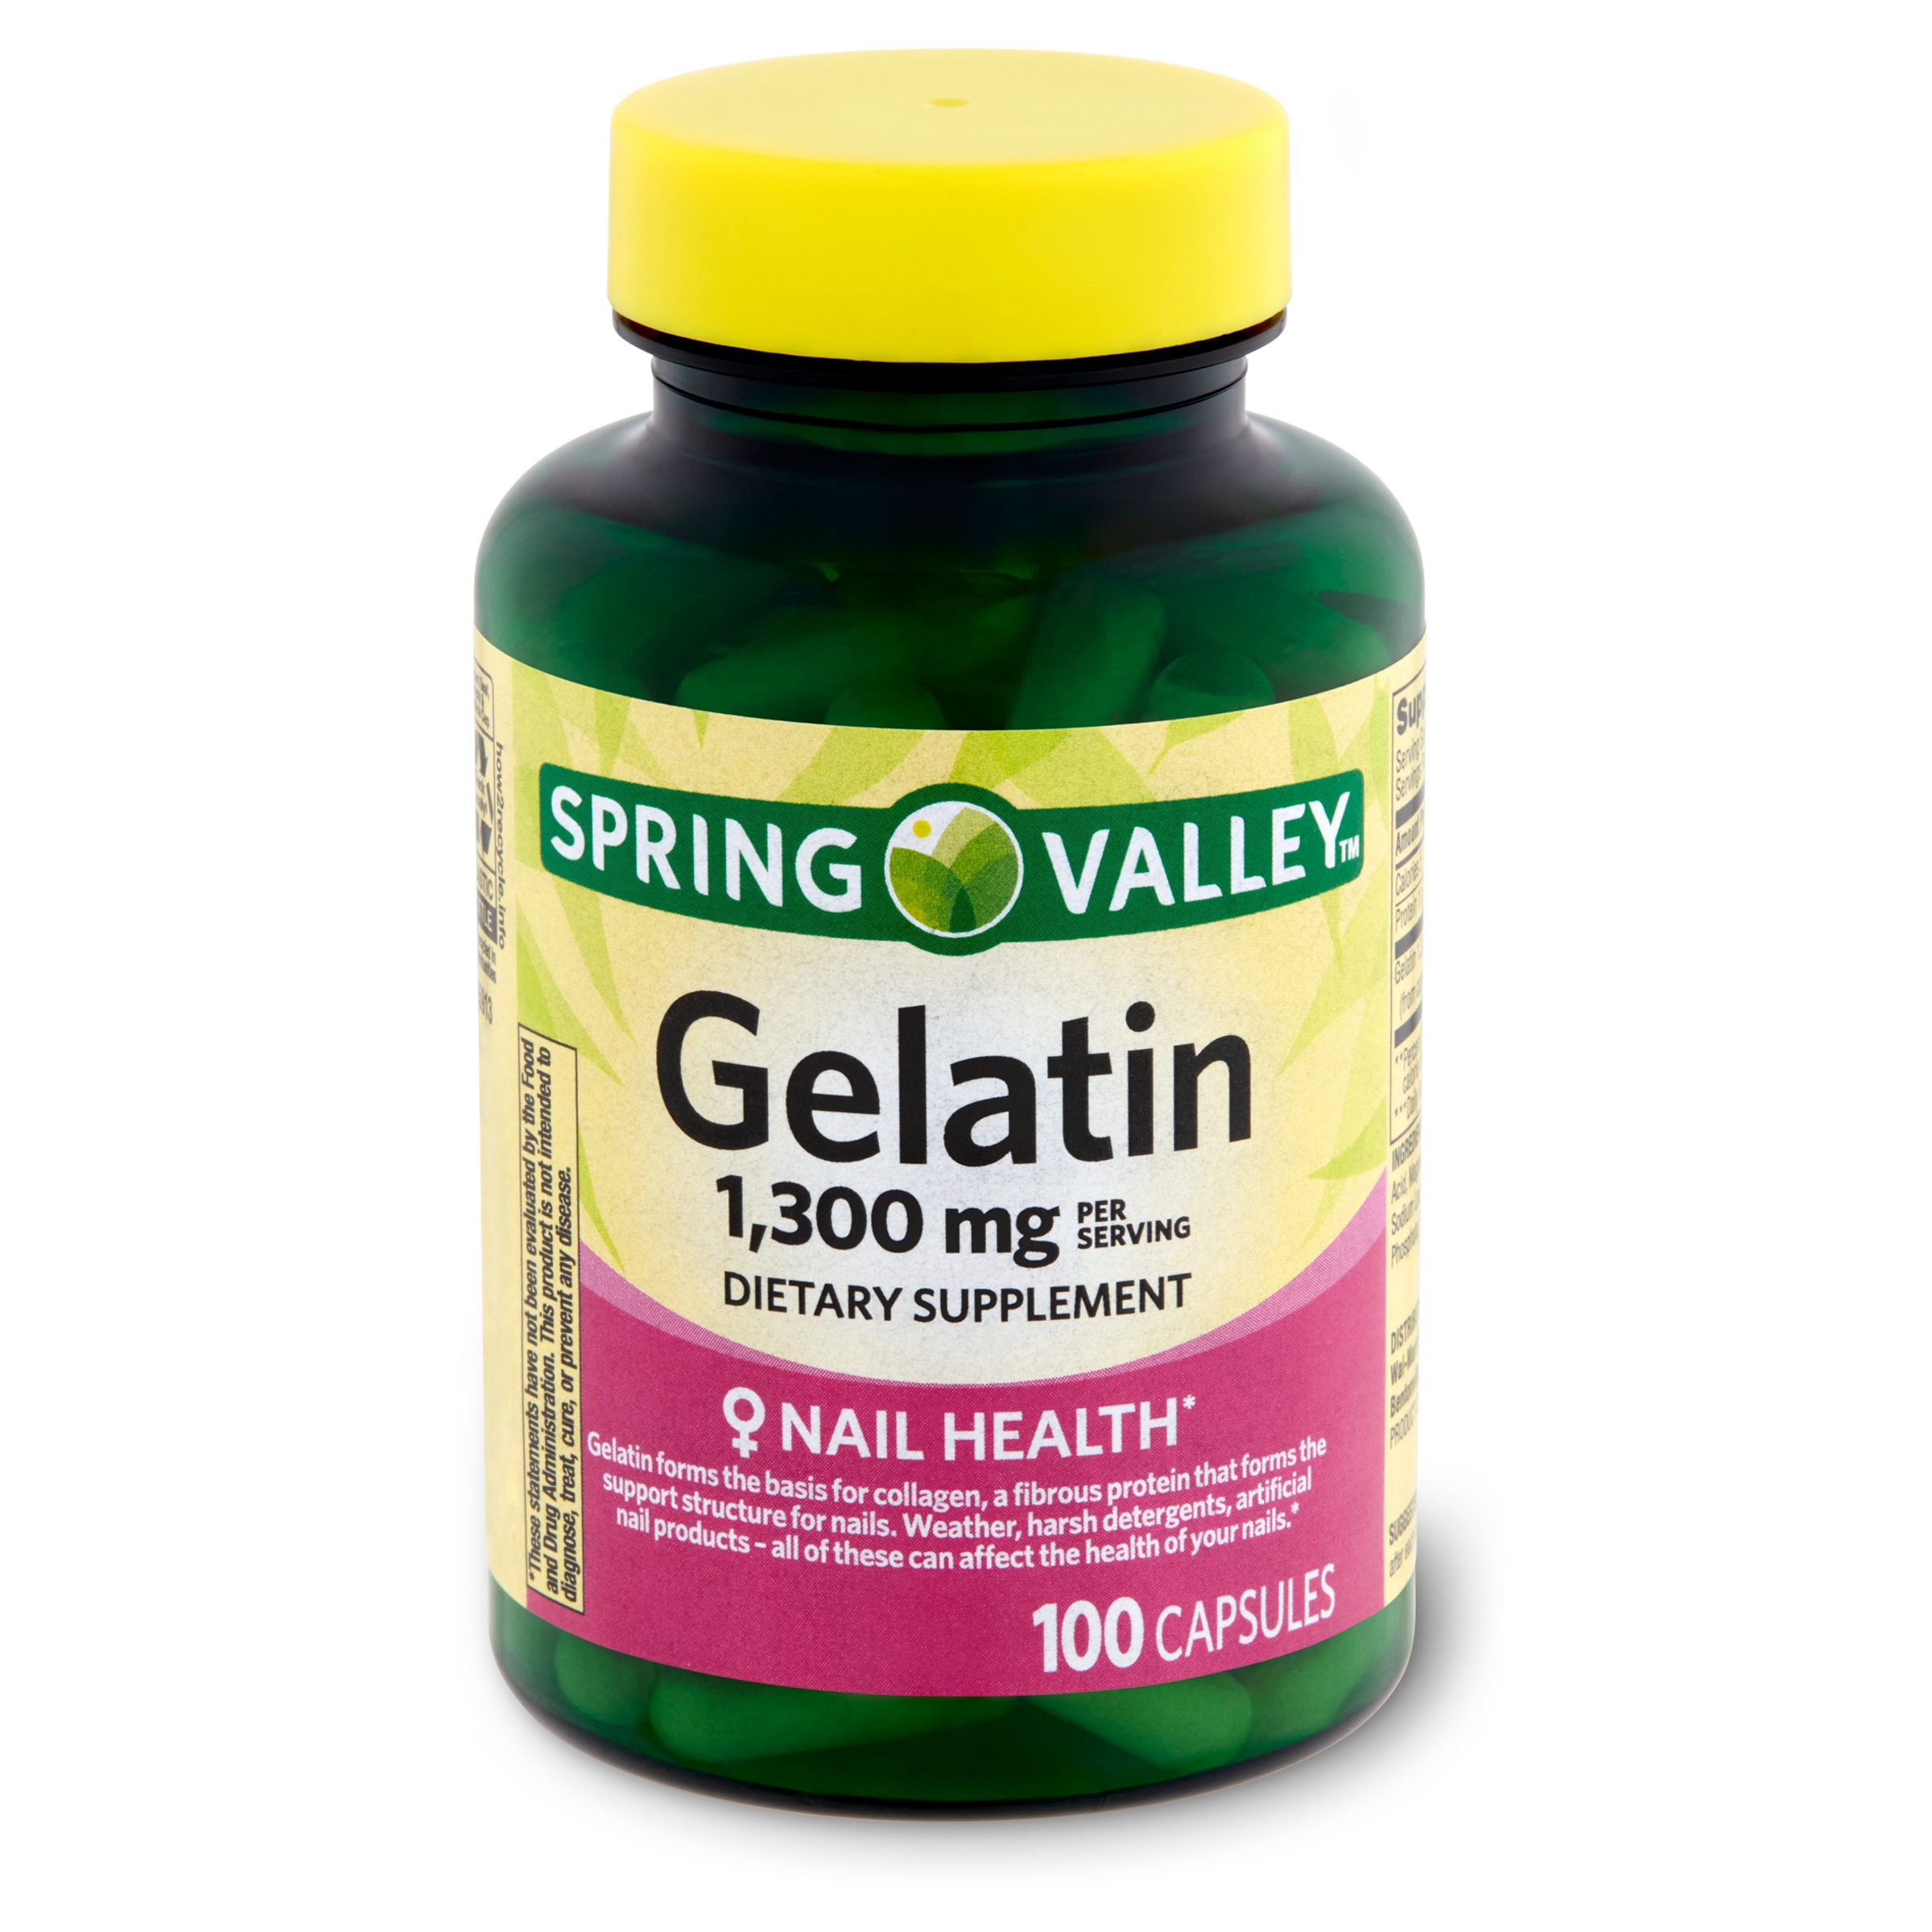 Spring Valley Gelatin Dietary Supplement, 1,300 mg, 100 Count - image 1 of 8